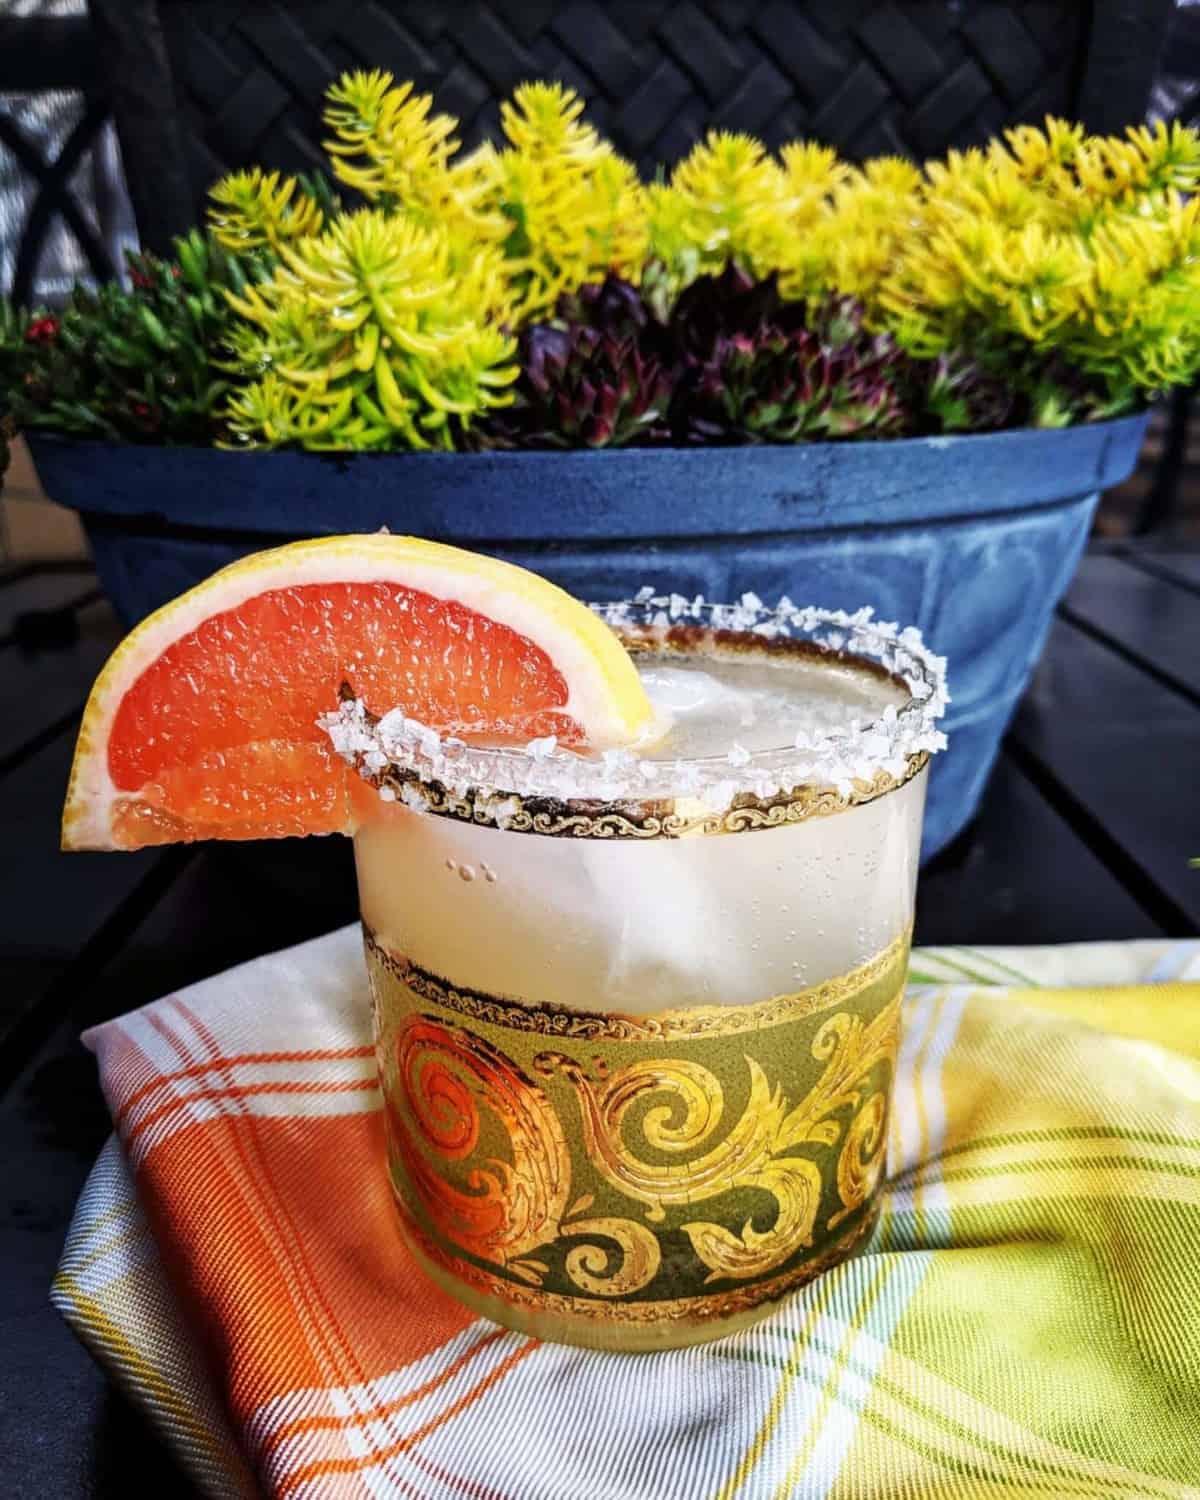 Paloma - Refreshing Tequila Cocktail With Only 4 Ingredients